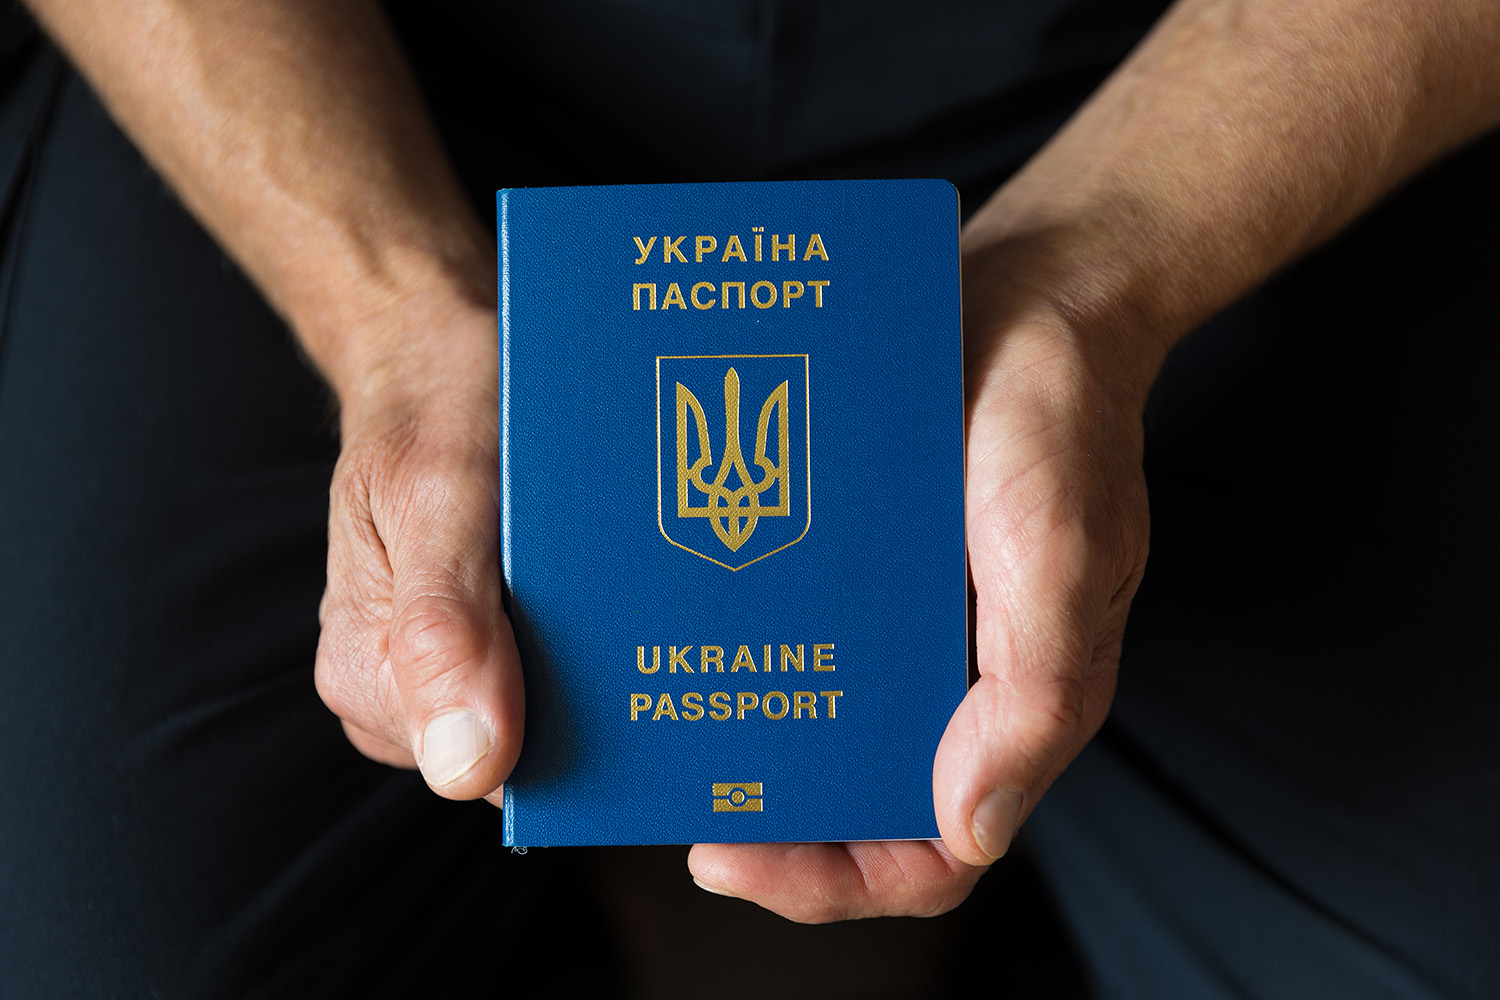 How to deal if a local government employee stayed in the temporarily occupied territory and was forced to obtain a Russian passport?